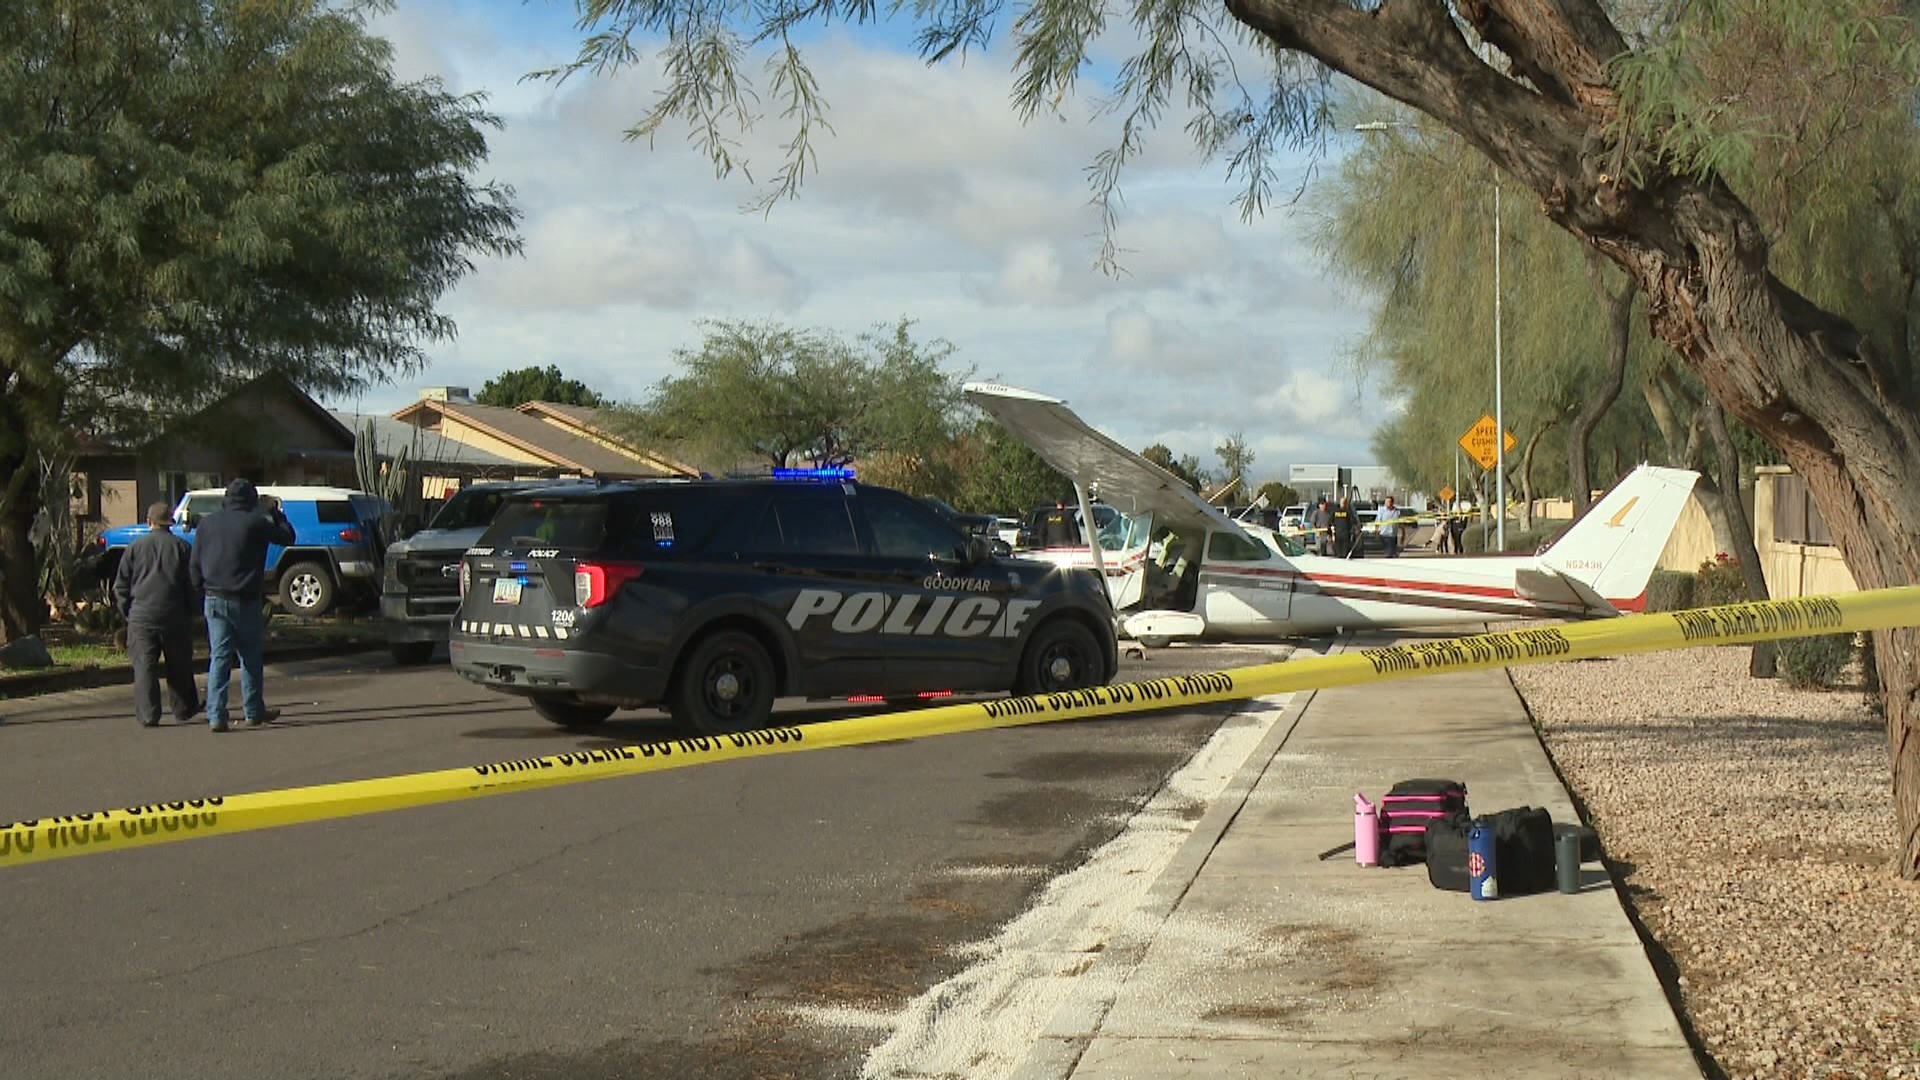 A small plane made a crash landing in a neighborhood in the town of Goodyear, just west of Phoenix. 12News spoke with people who live on the where the plane crashed.